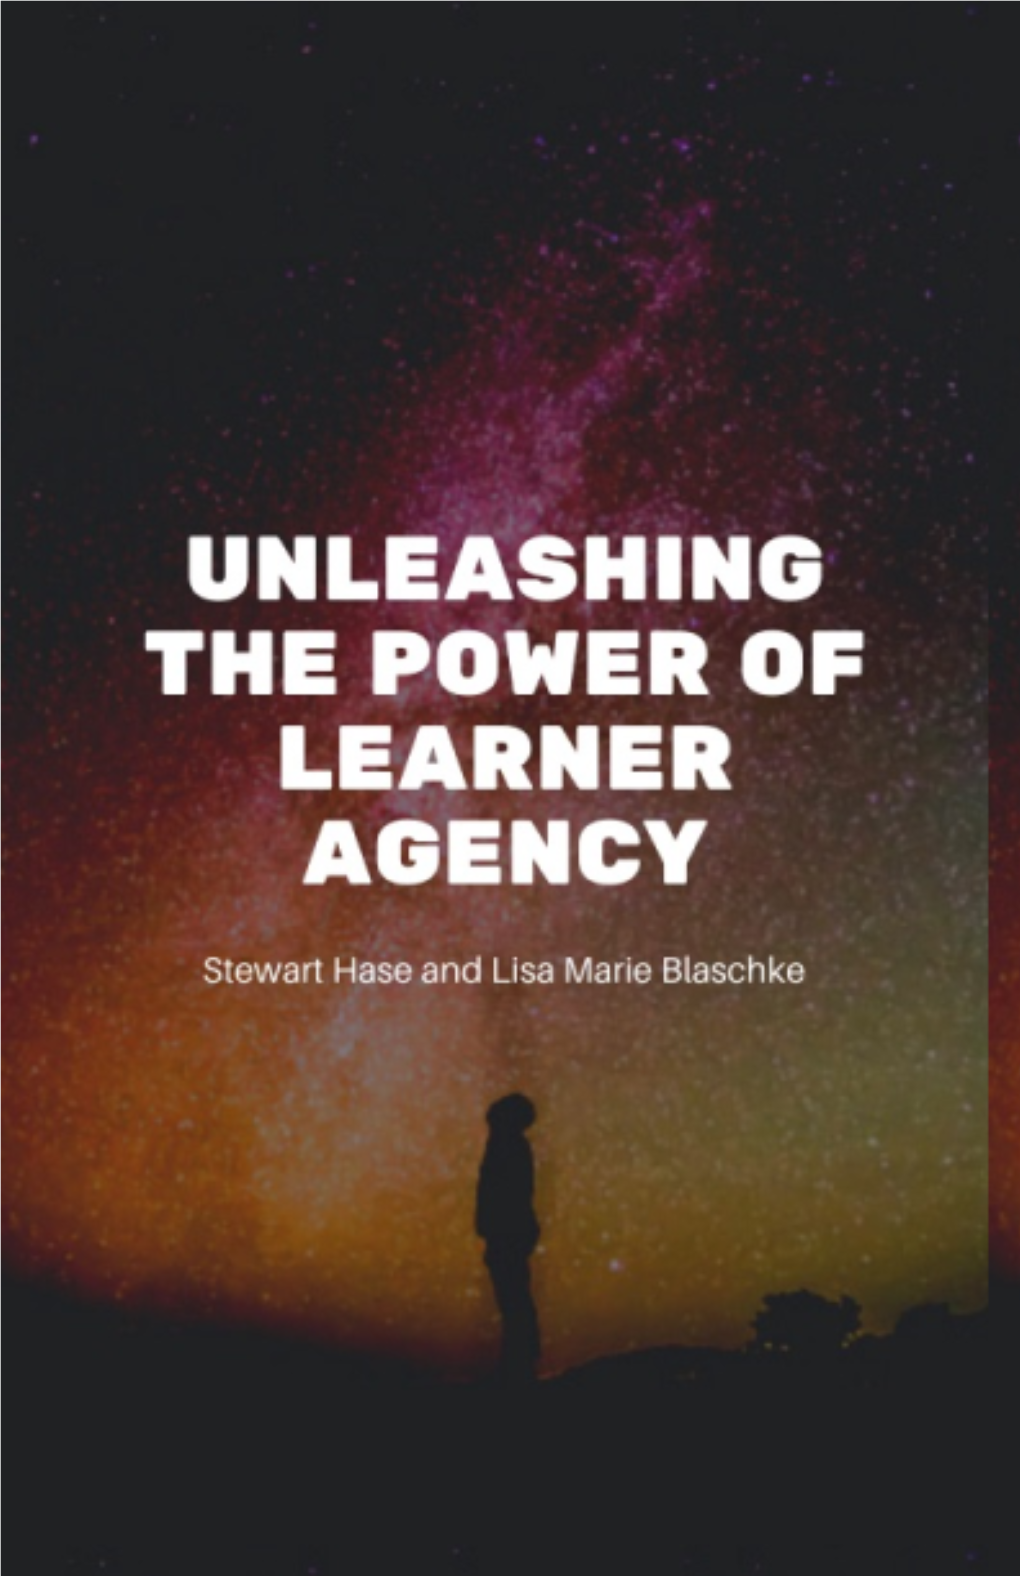 Unleashing the Power of Learner Agency